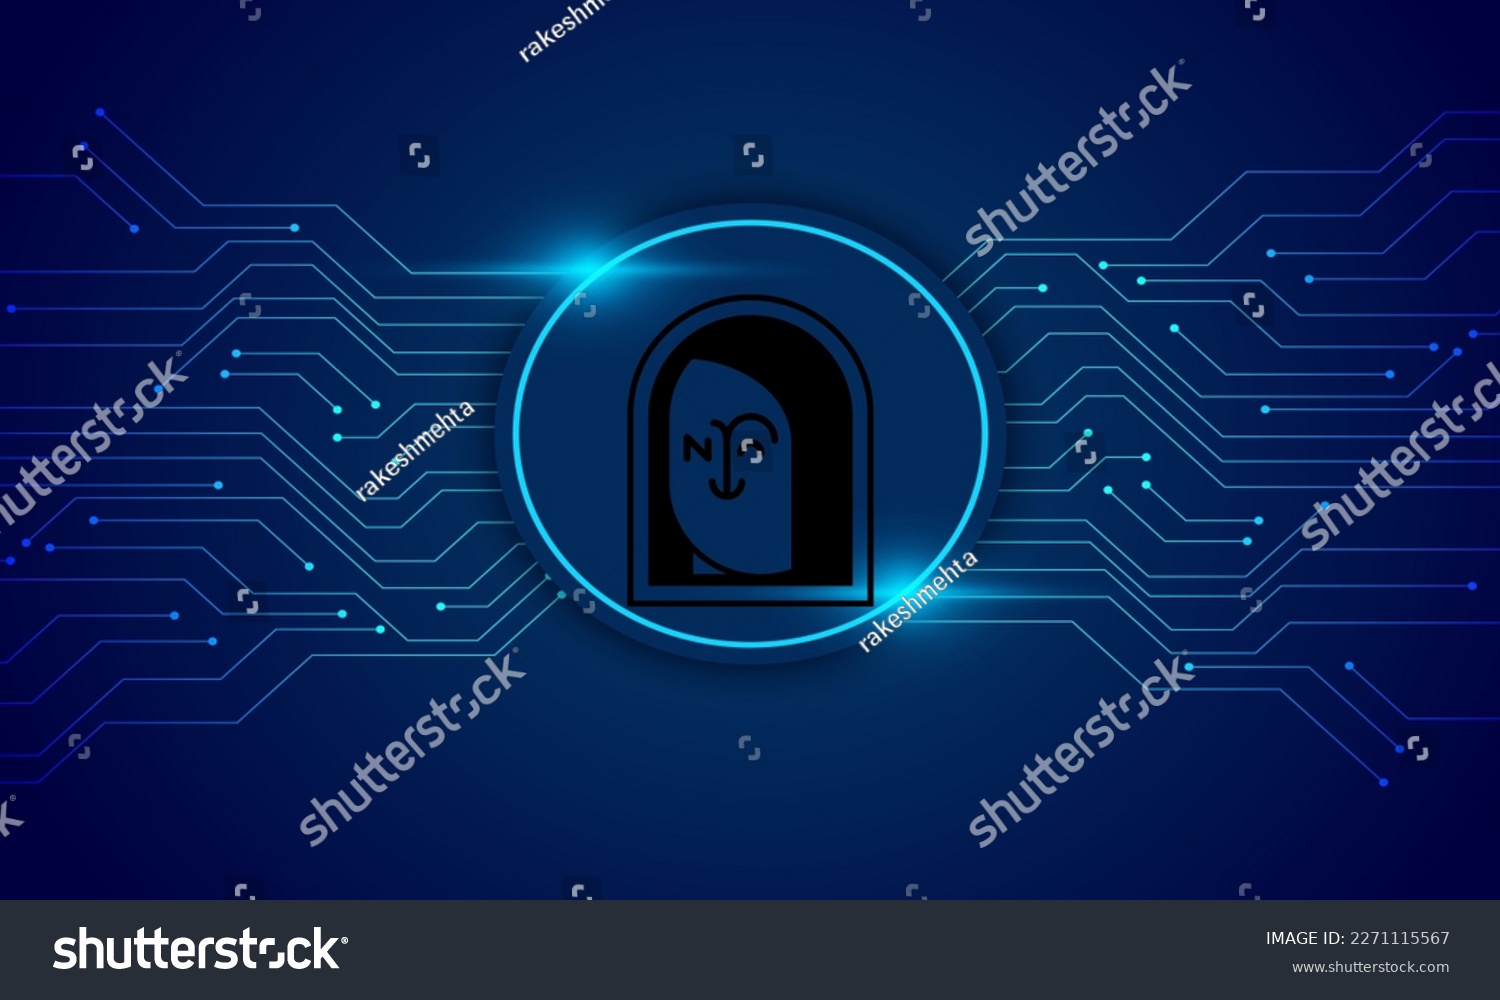 SVG of Ape NFT  logo with crypto currency themed circle background design. Ape NFT Token  currency vector illustration blockchain technology concept  svg